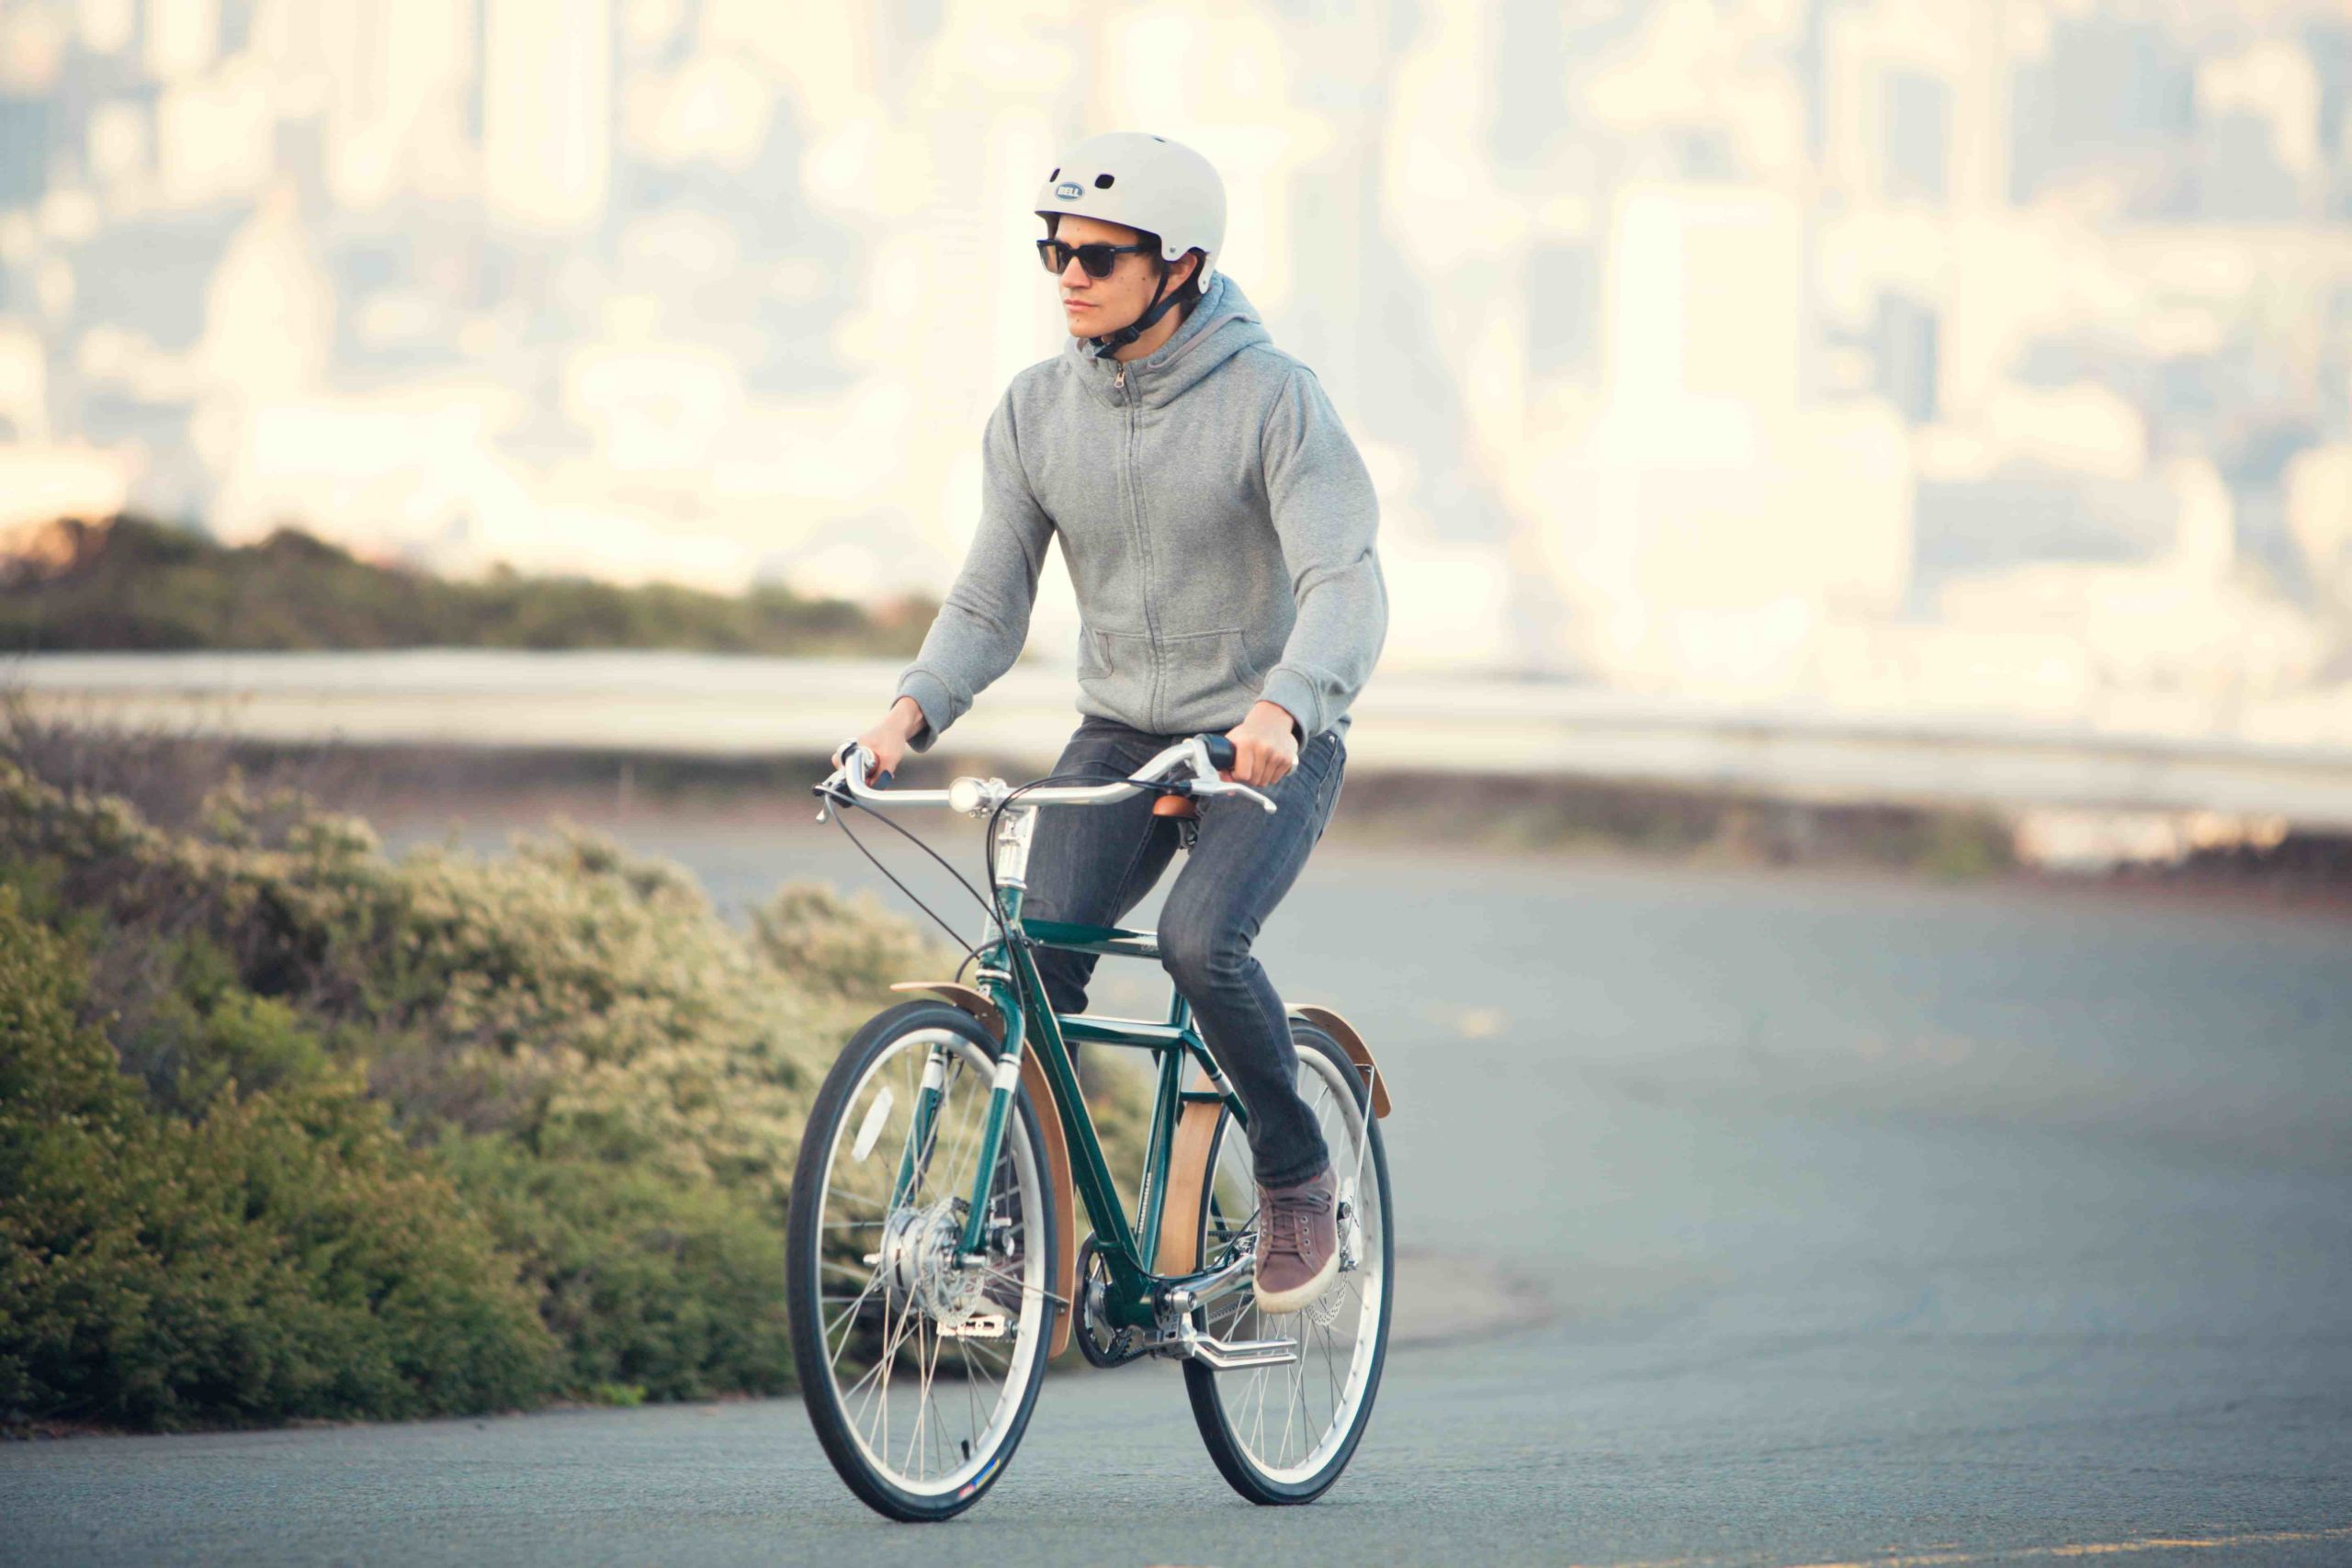 Can you ride an electric bike if you are banned from driving?